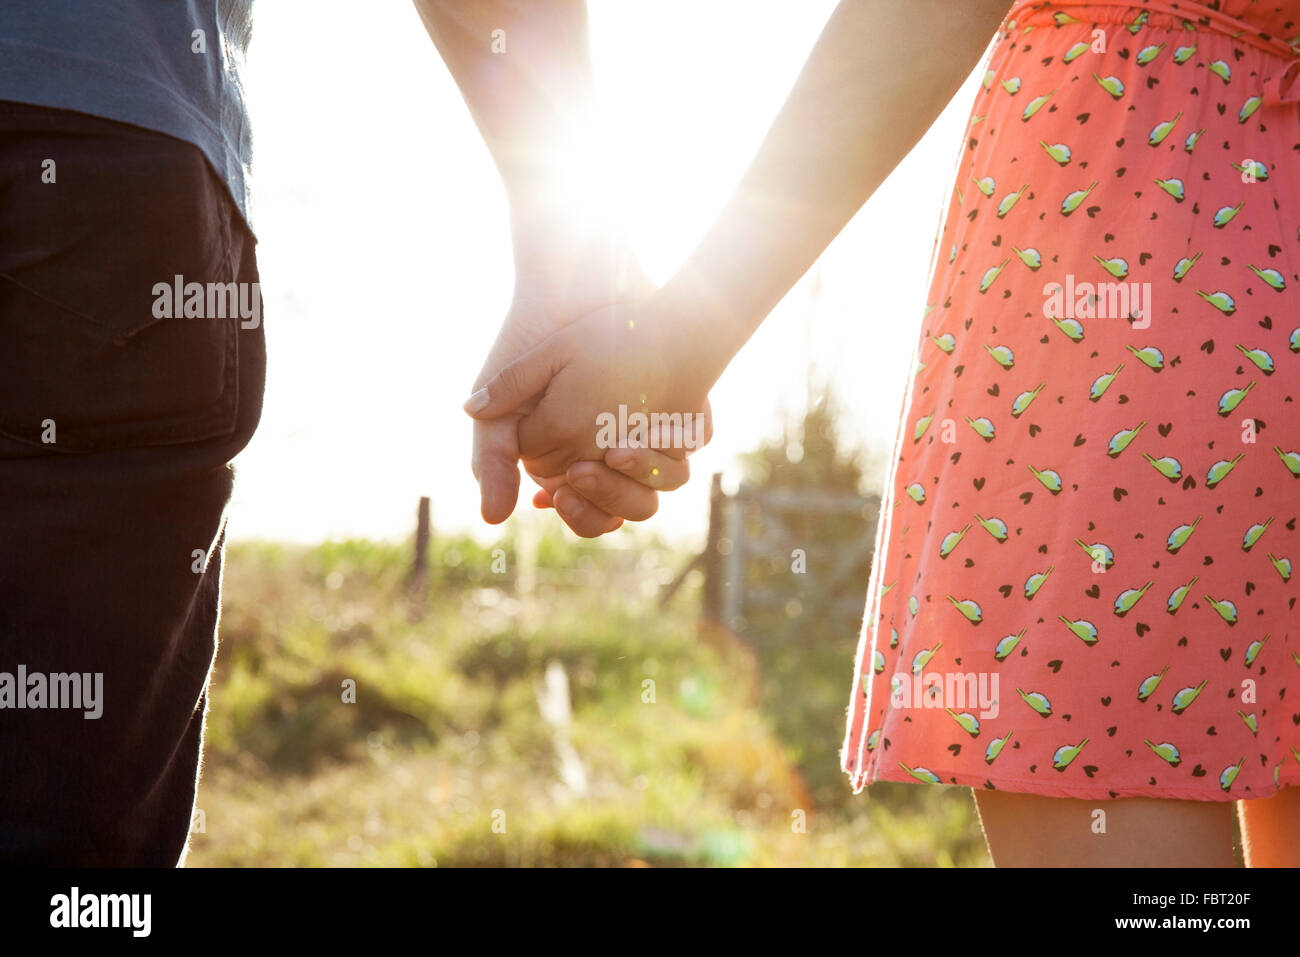 Couple holding hands, close-up Stock Photo